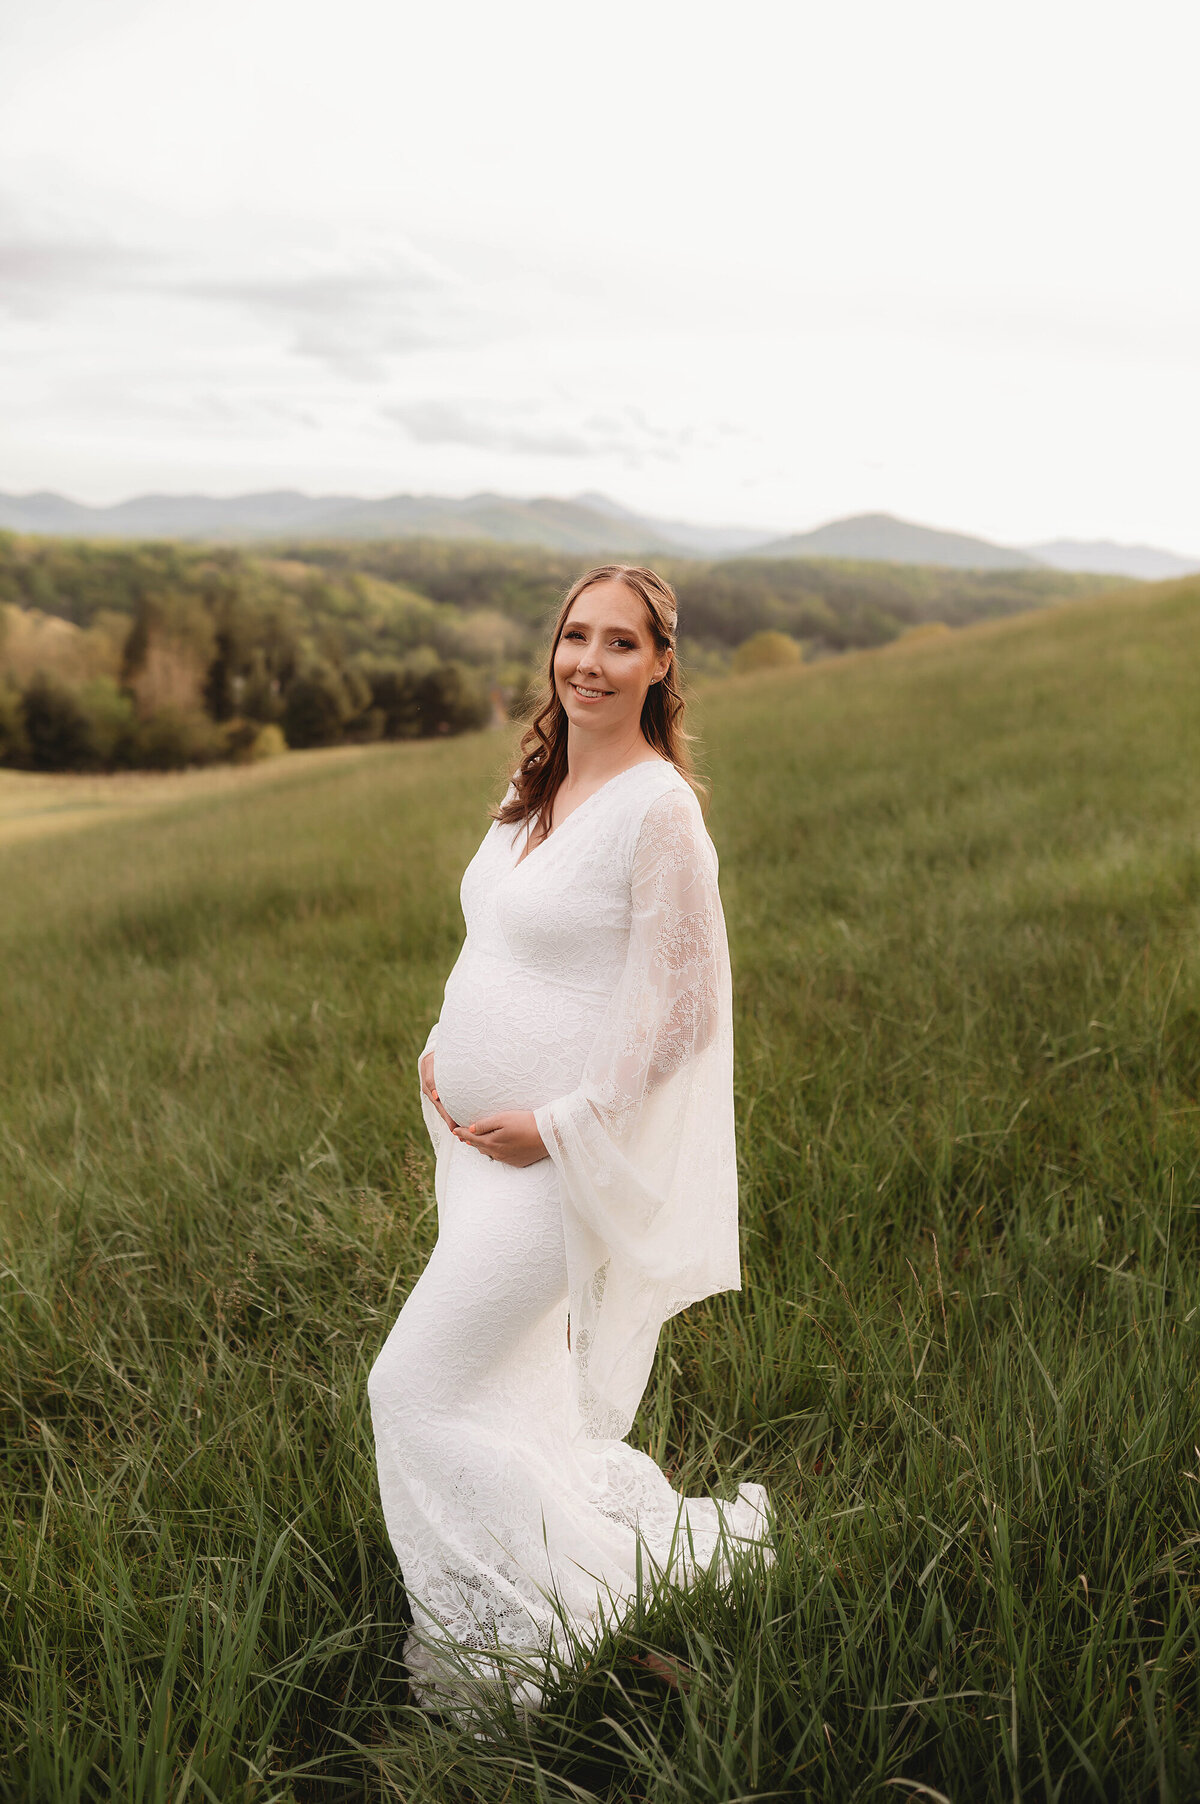 Expectant mother poses for Maternity Photos  in Asheville, NC.